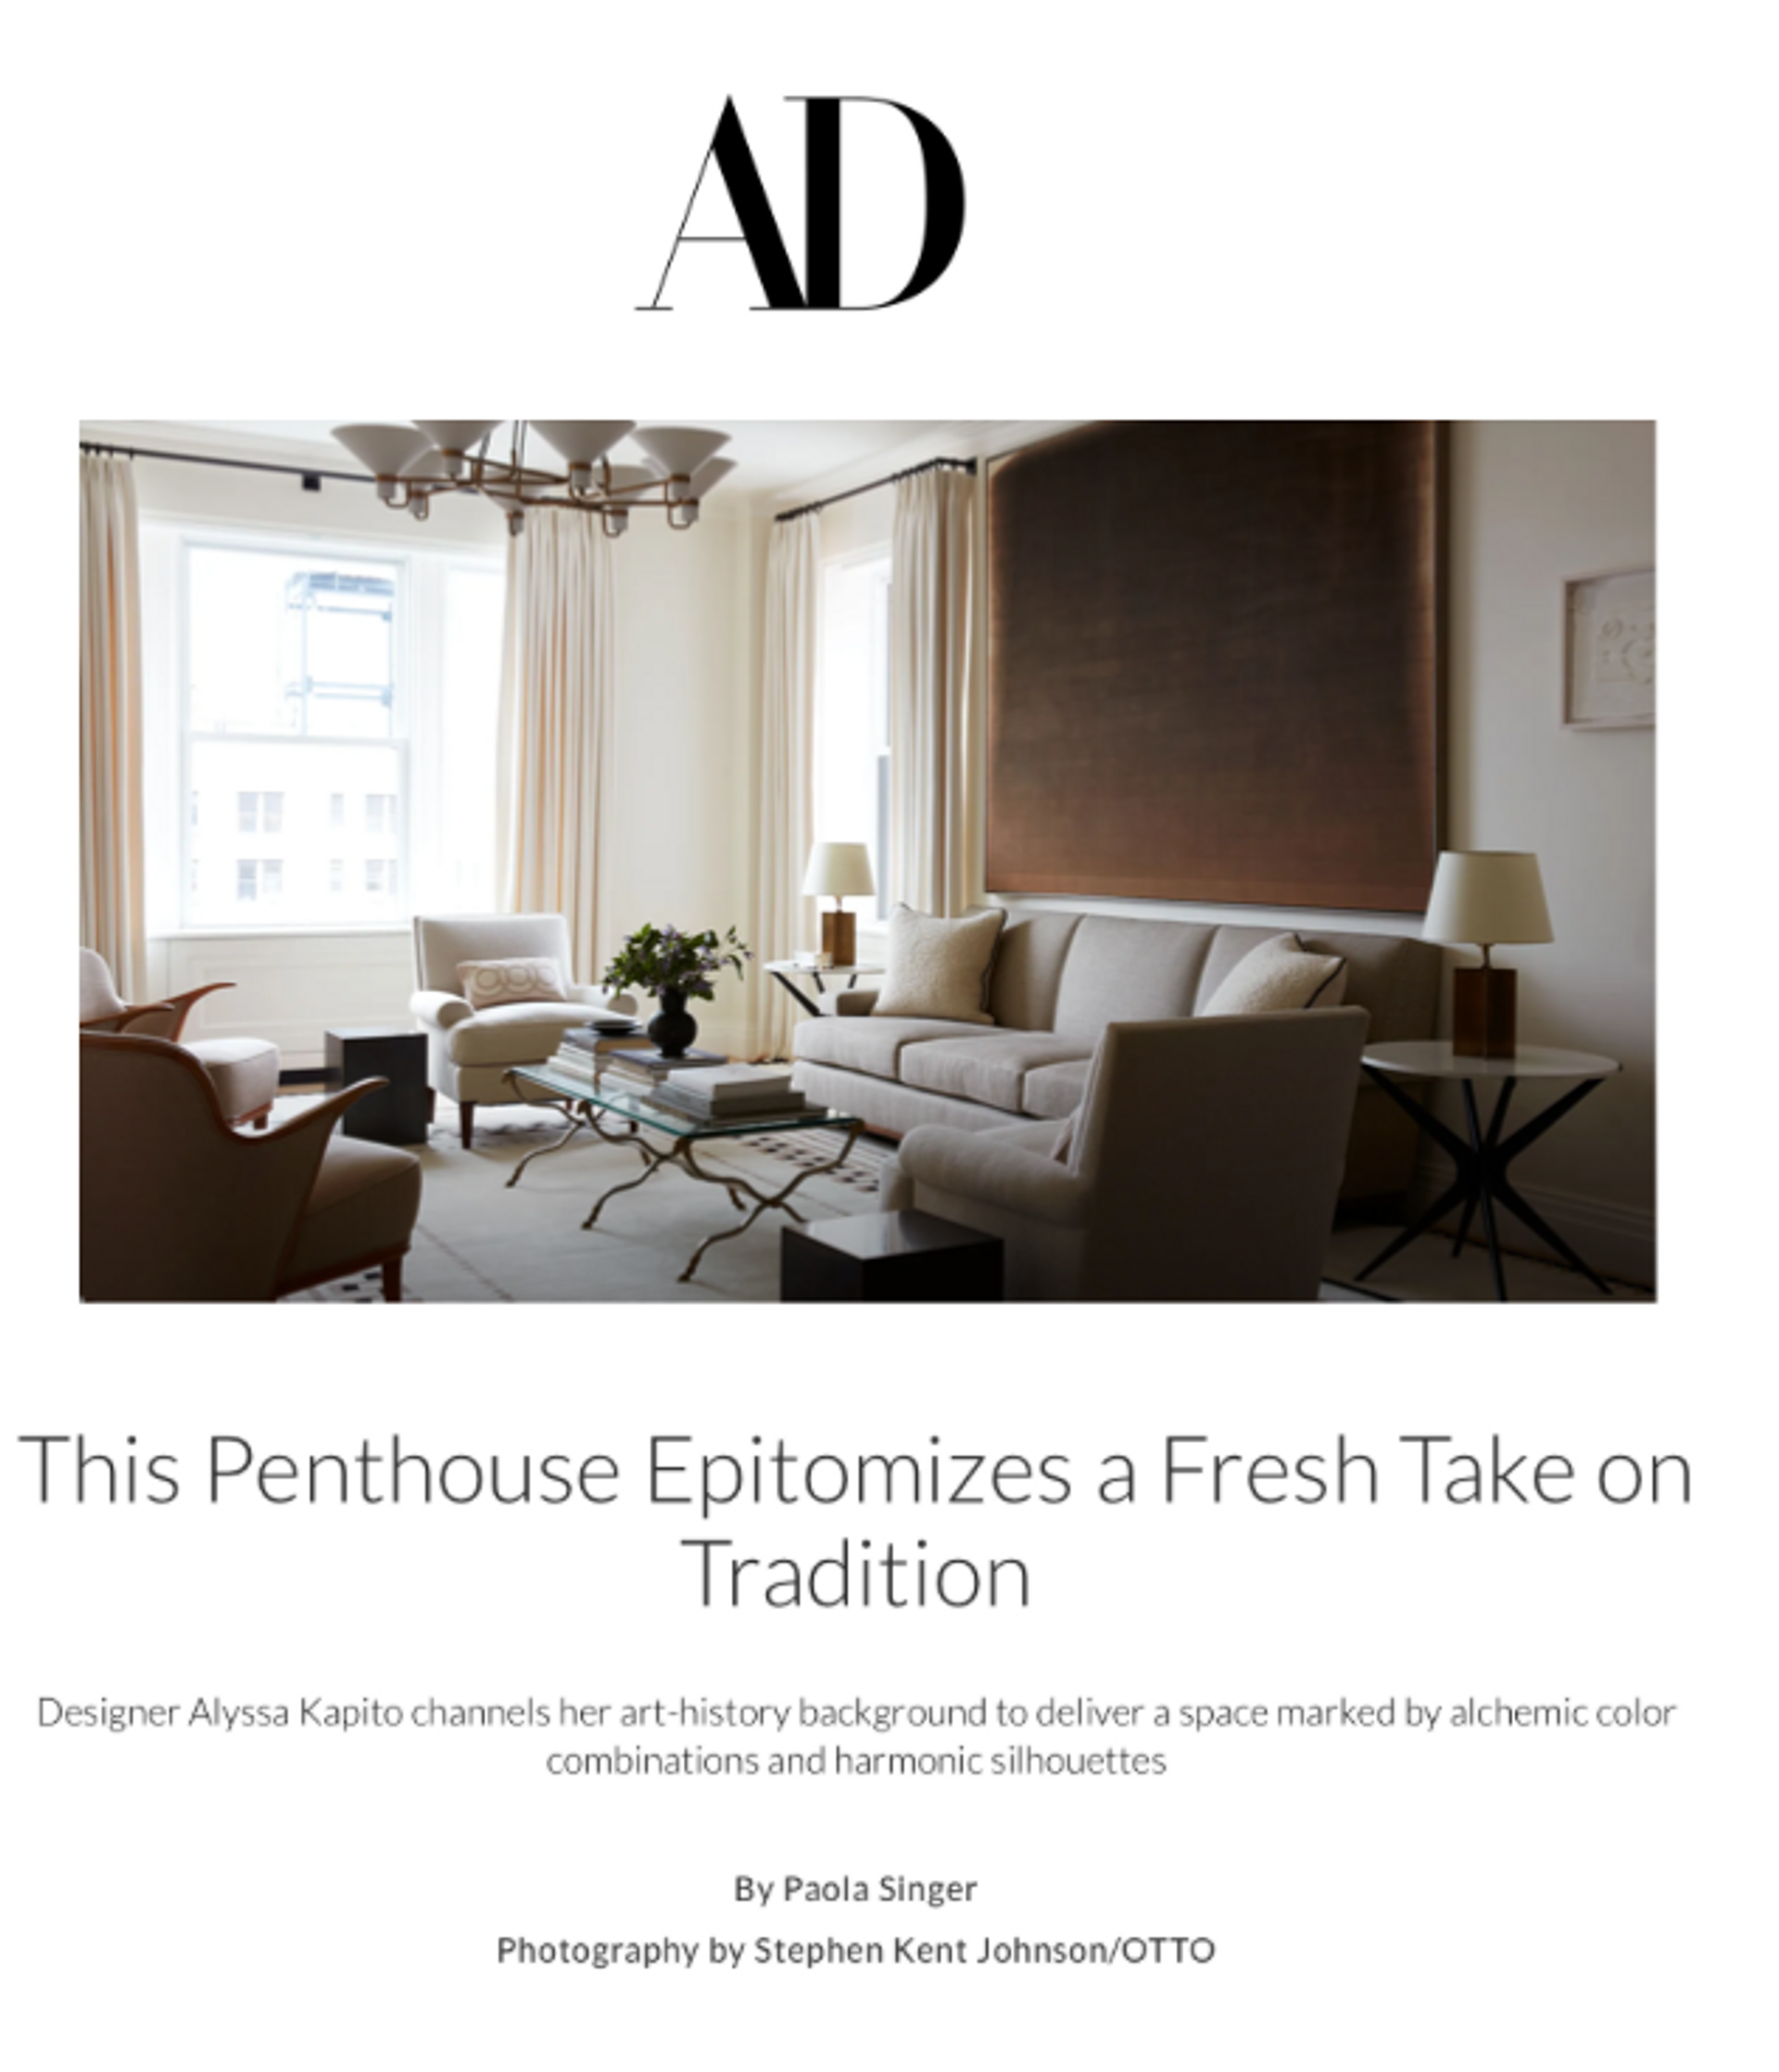 Press logo from Architectural Digest